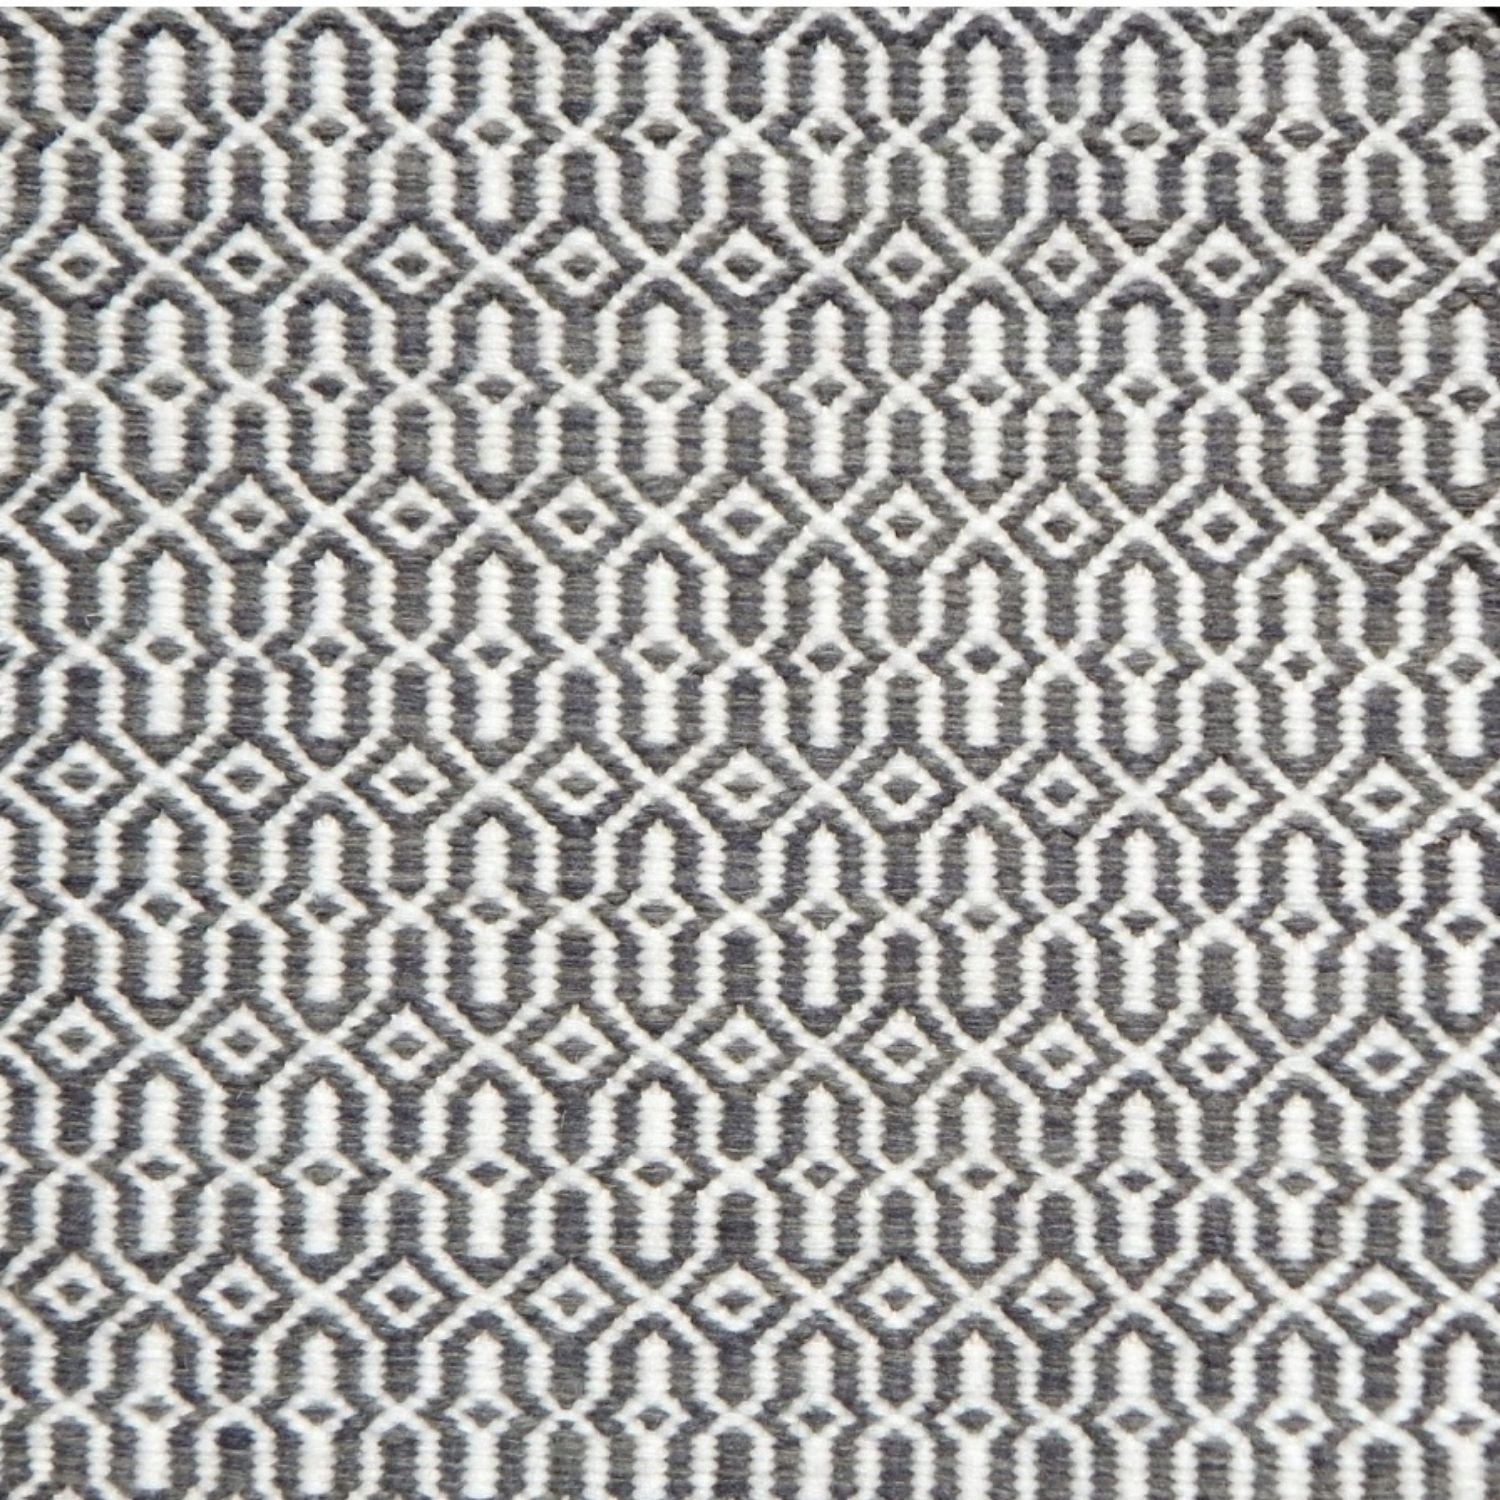 A rug with an overall geometric pattern in dark blue grey and ivory.